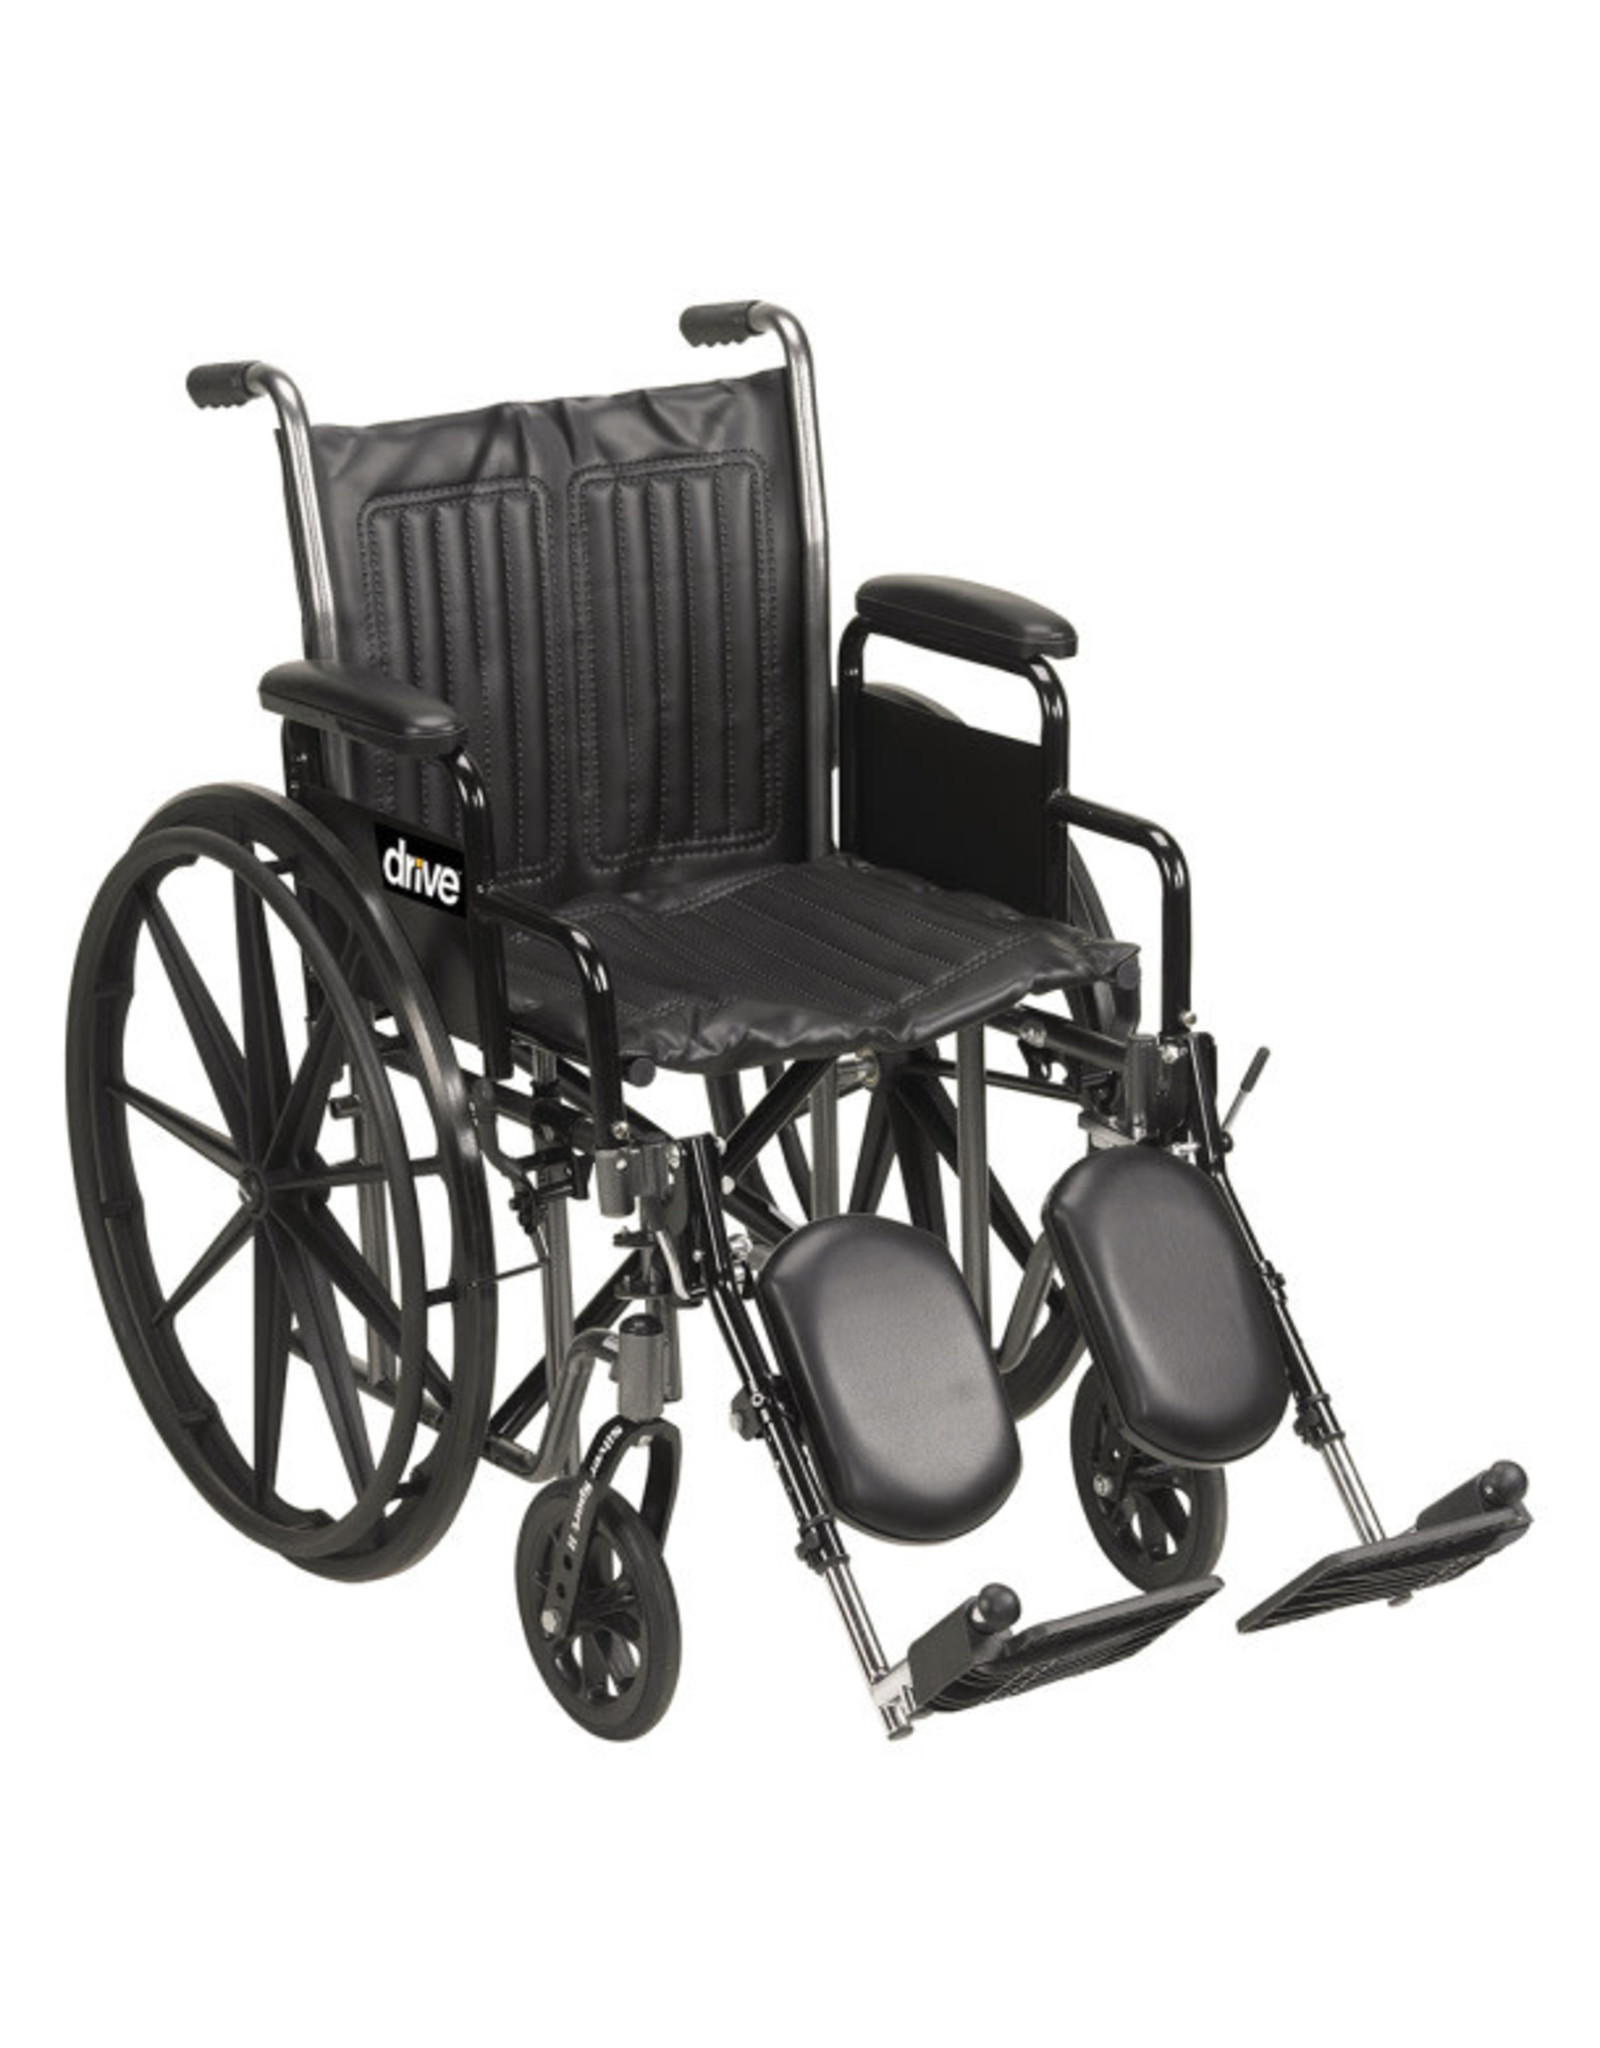 Drive Silver Sport 2 Wheelchair - 20" width, detachable desk arms, elevating footrests